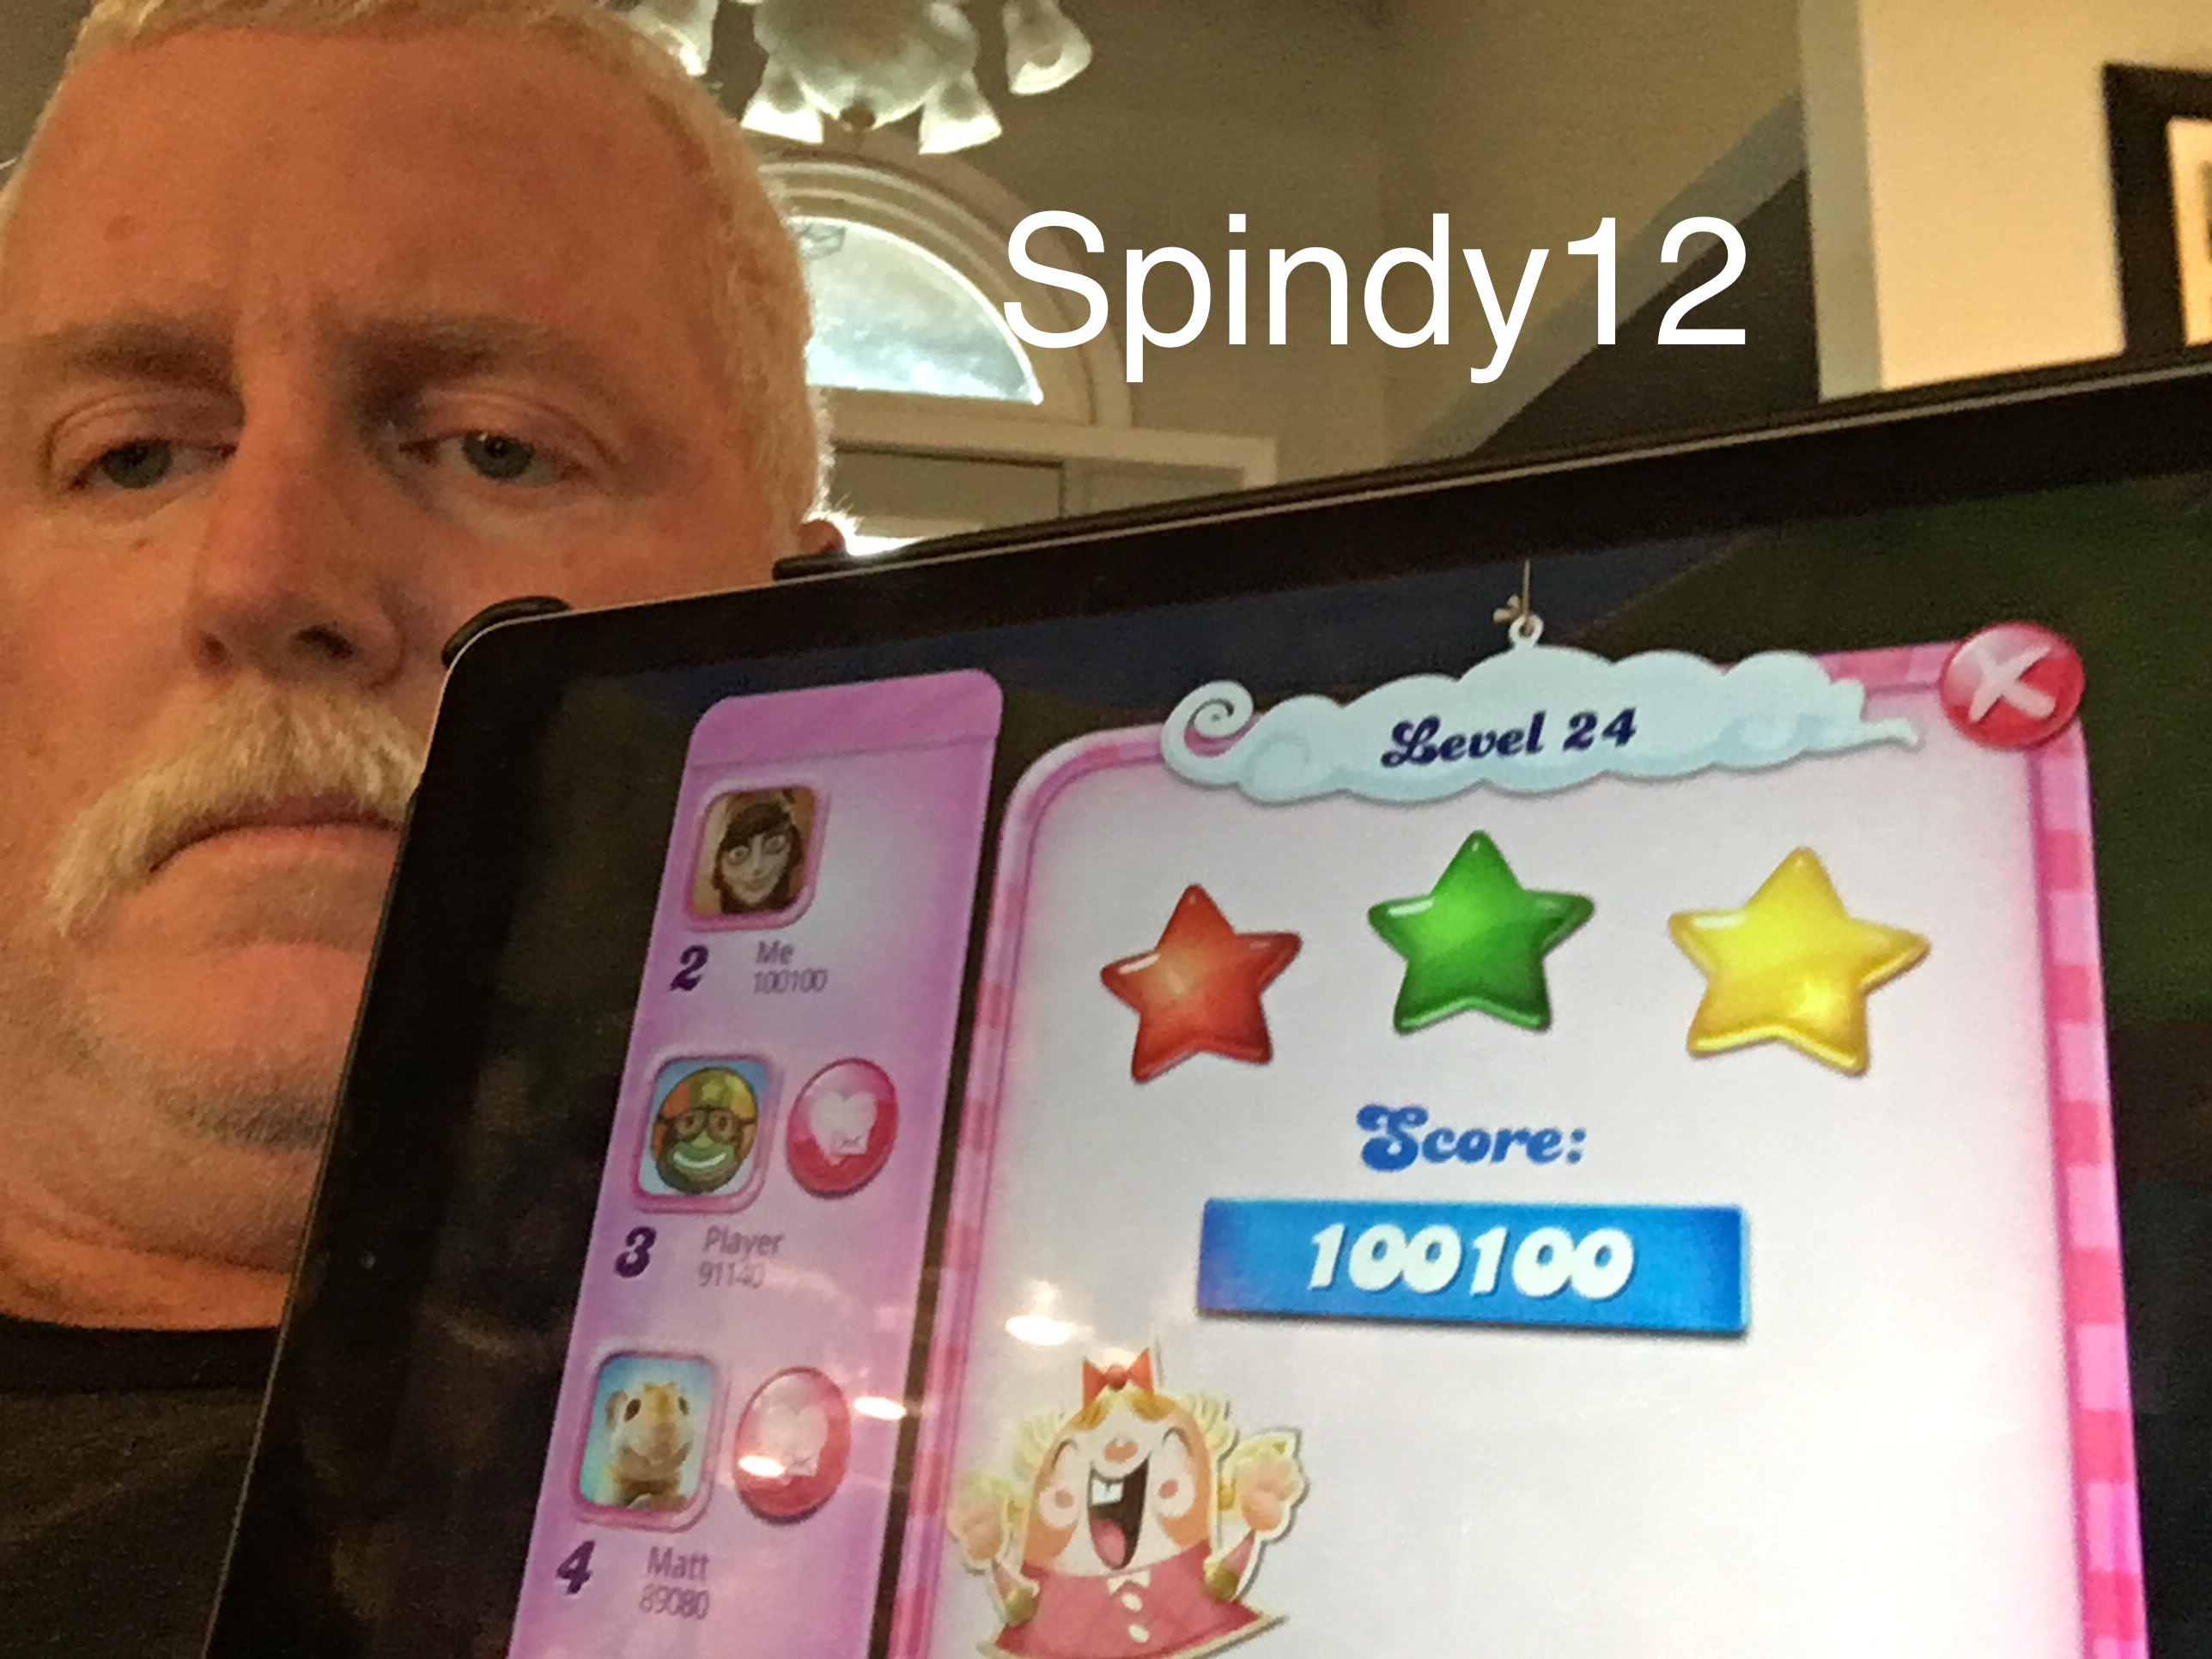 Spindy12: Candy Crush Saga: Level 024 (iOS) 100,100 points on 2016-12-21 17:25:08